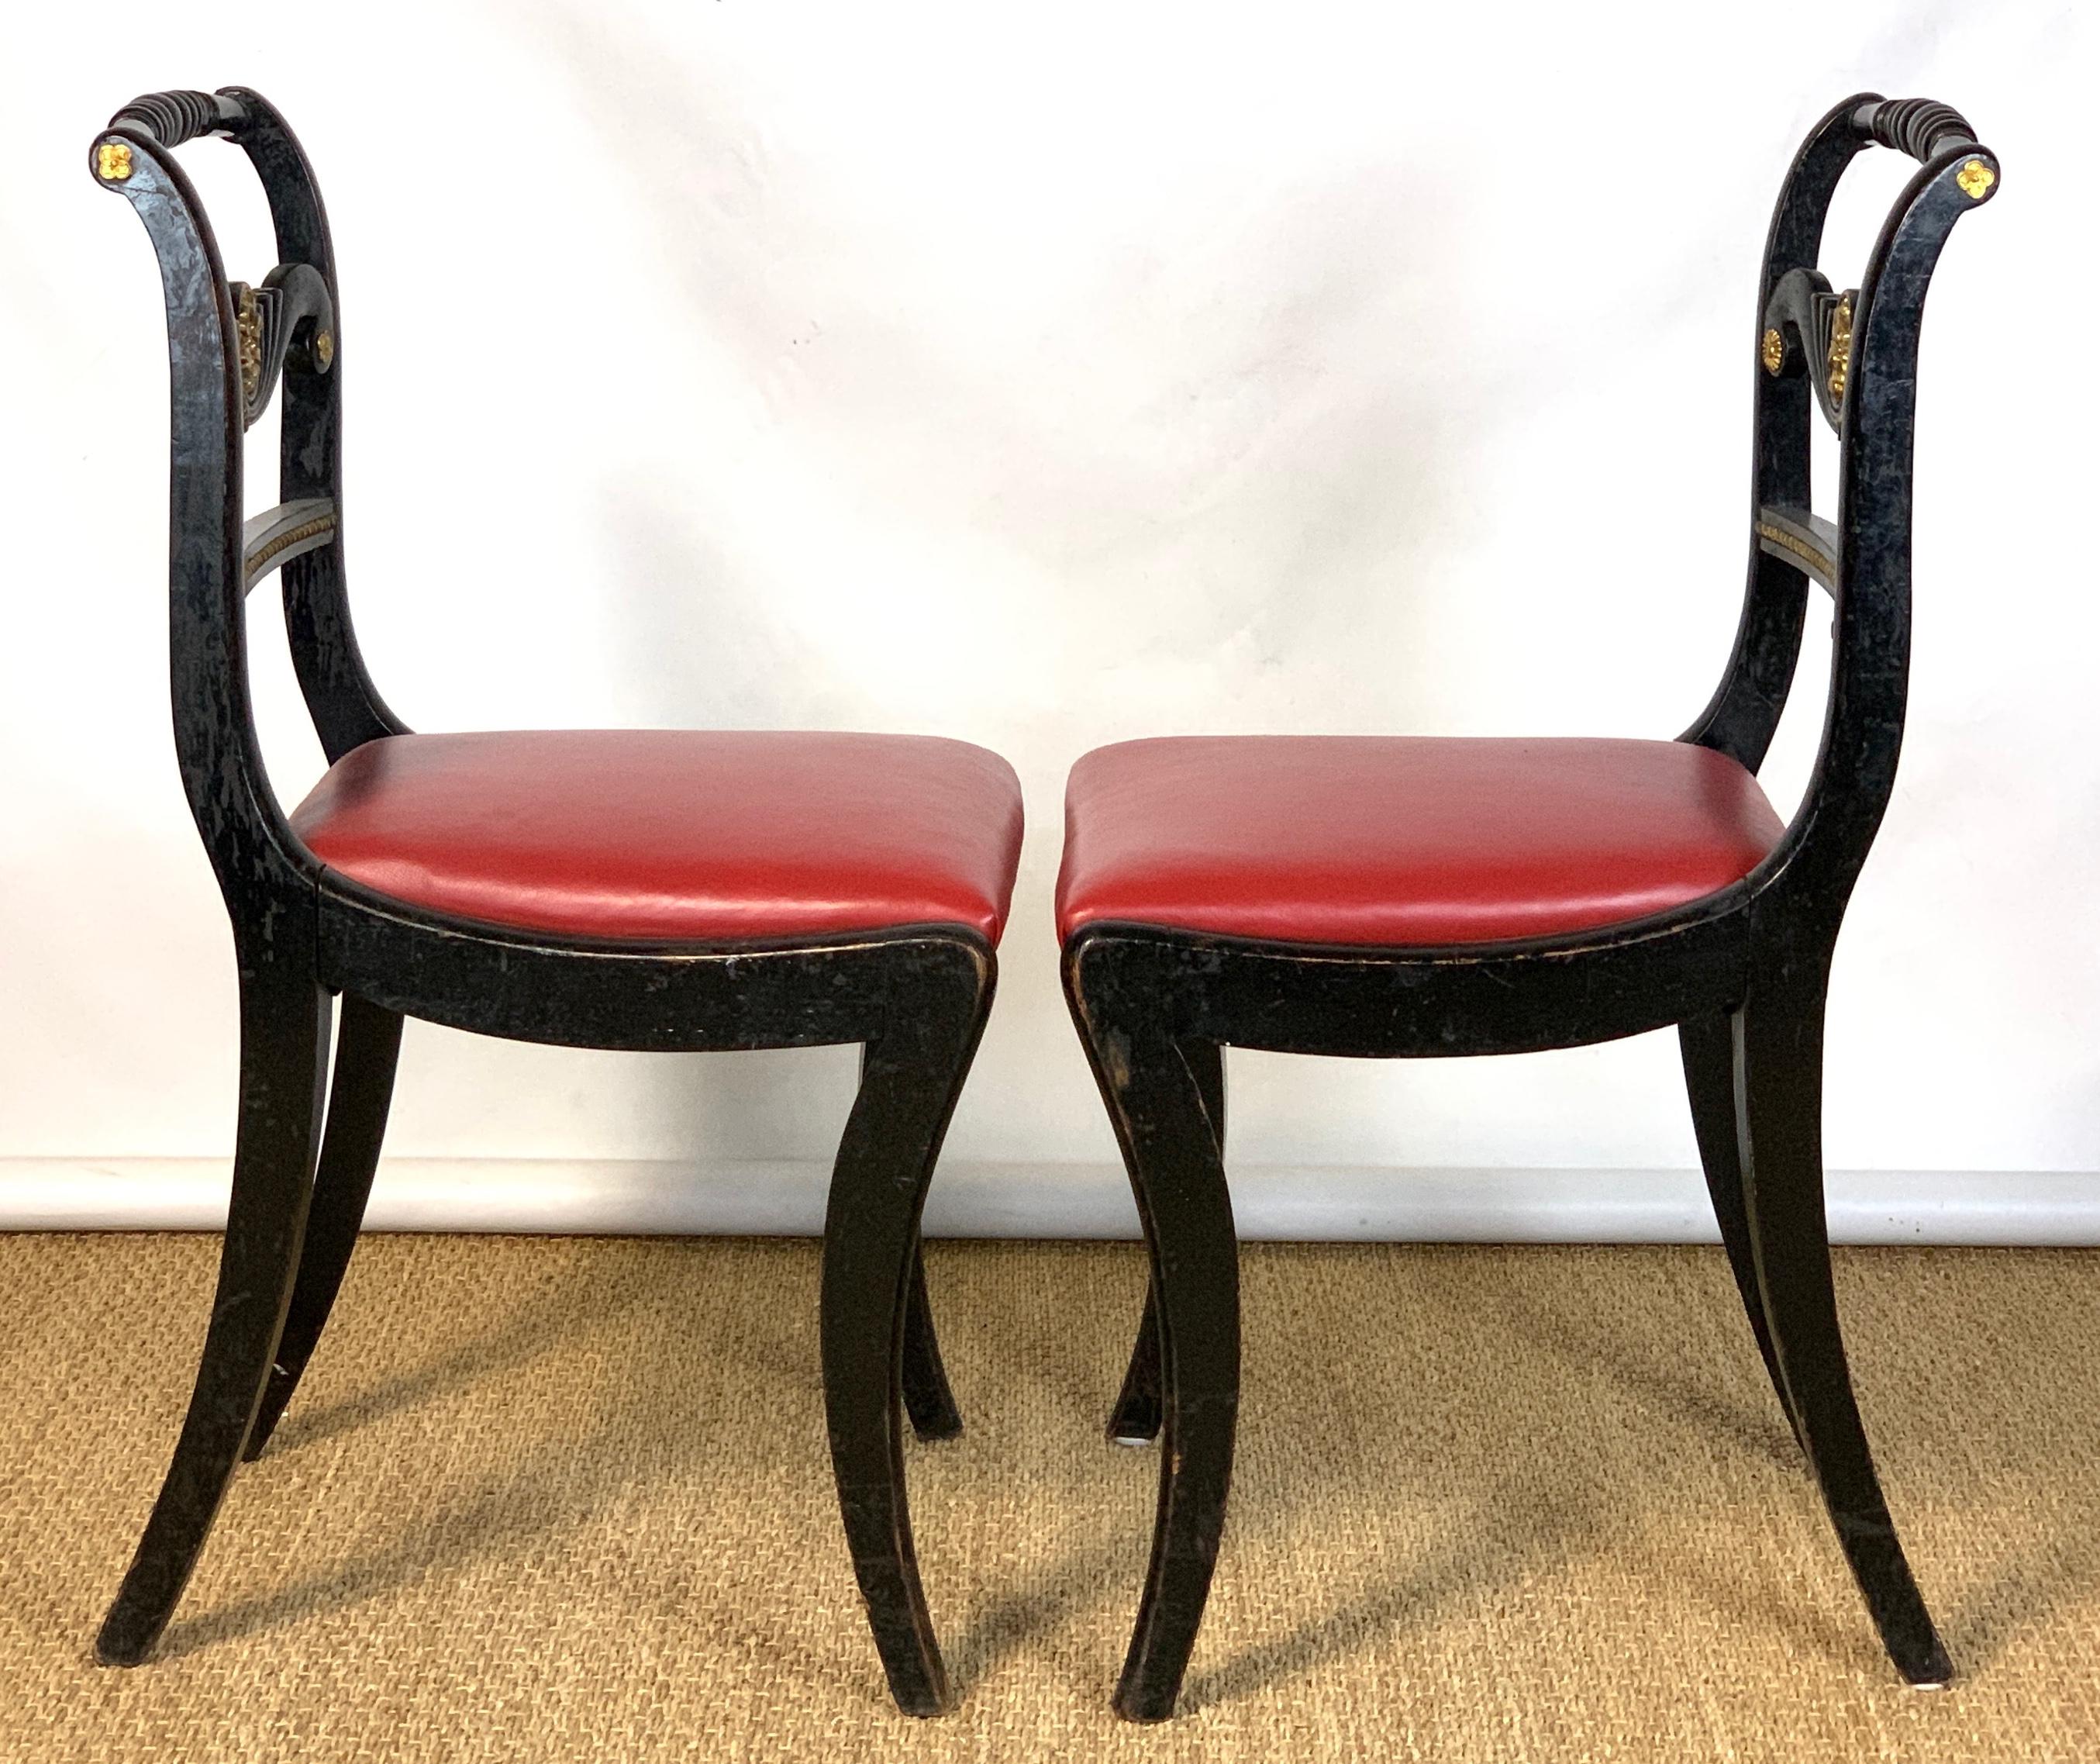 Early 19th Century Set of Four English Regency Dining Chairs